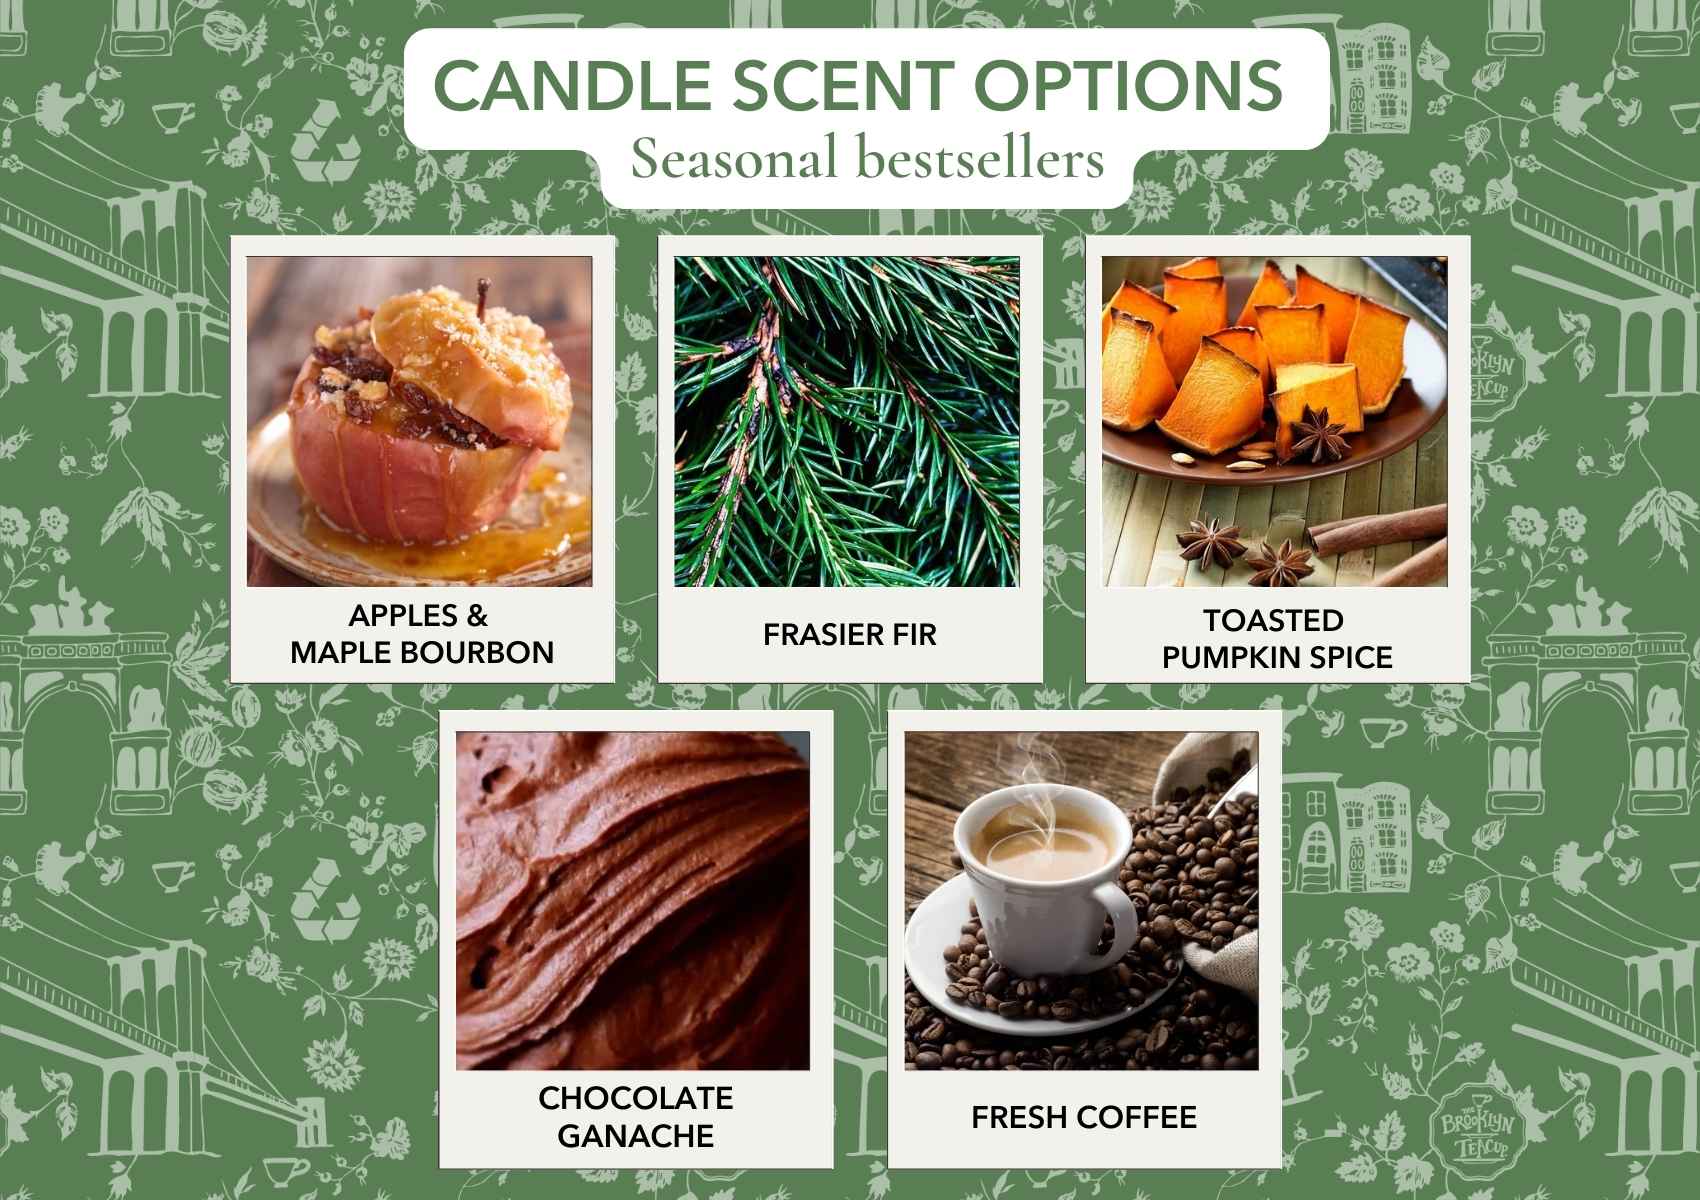 Official Candle Scents List & Fragrance Descriptions - The Brooklyn Teacup